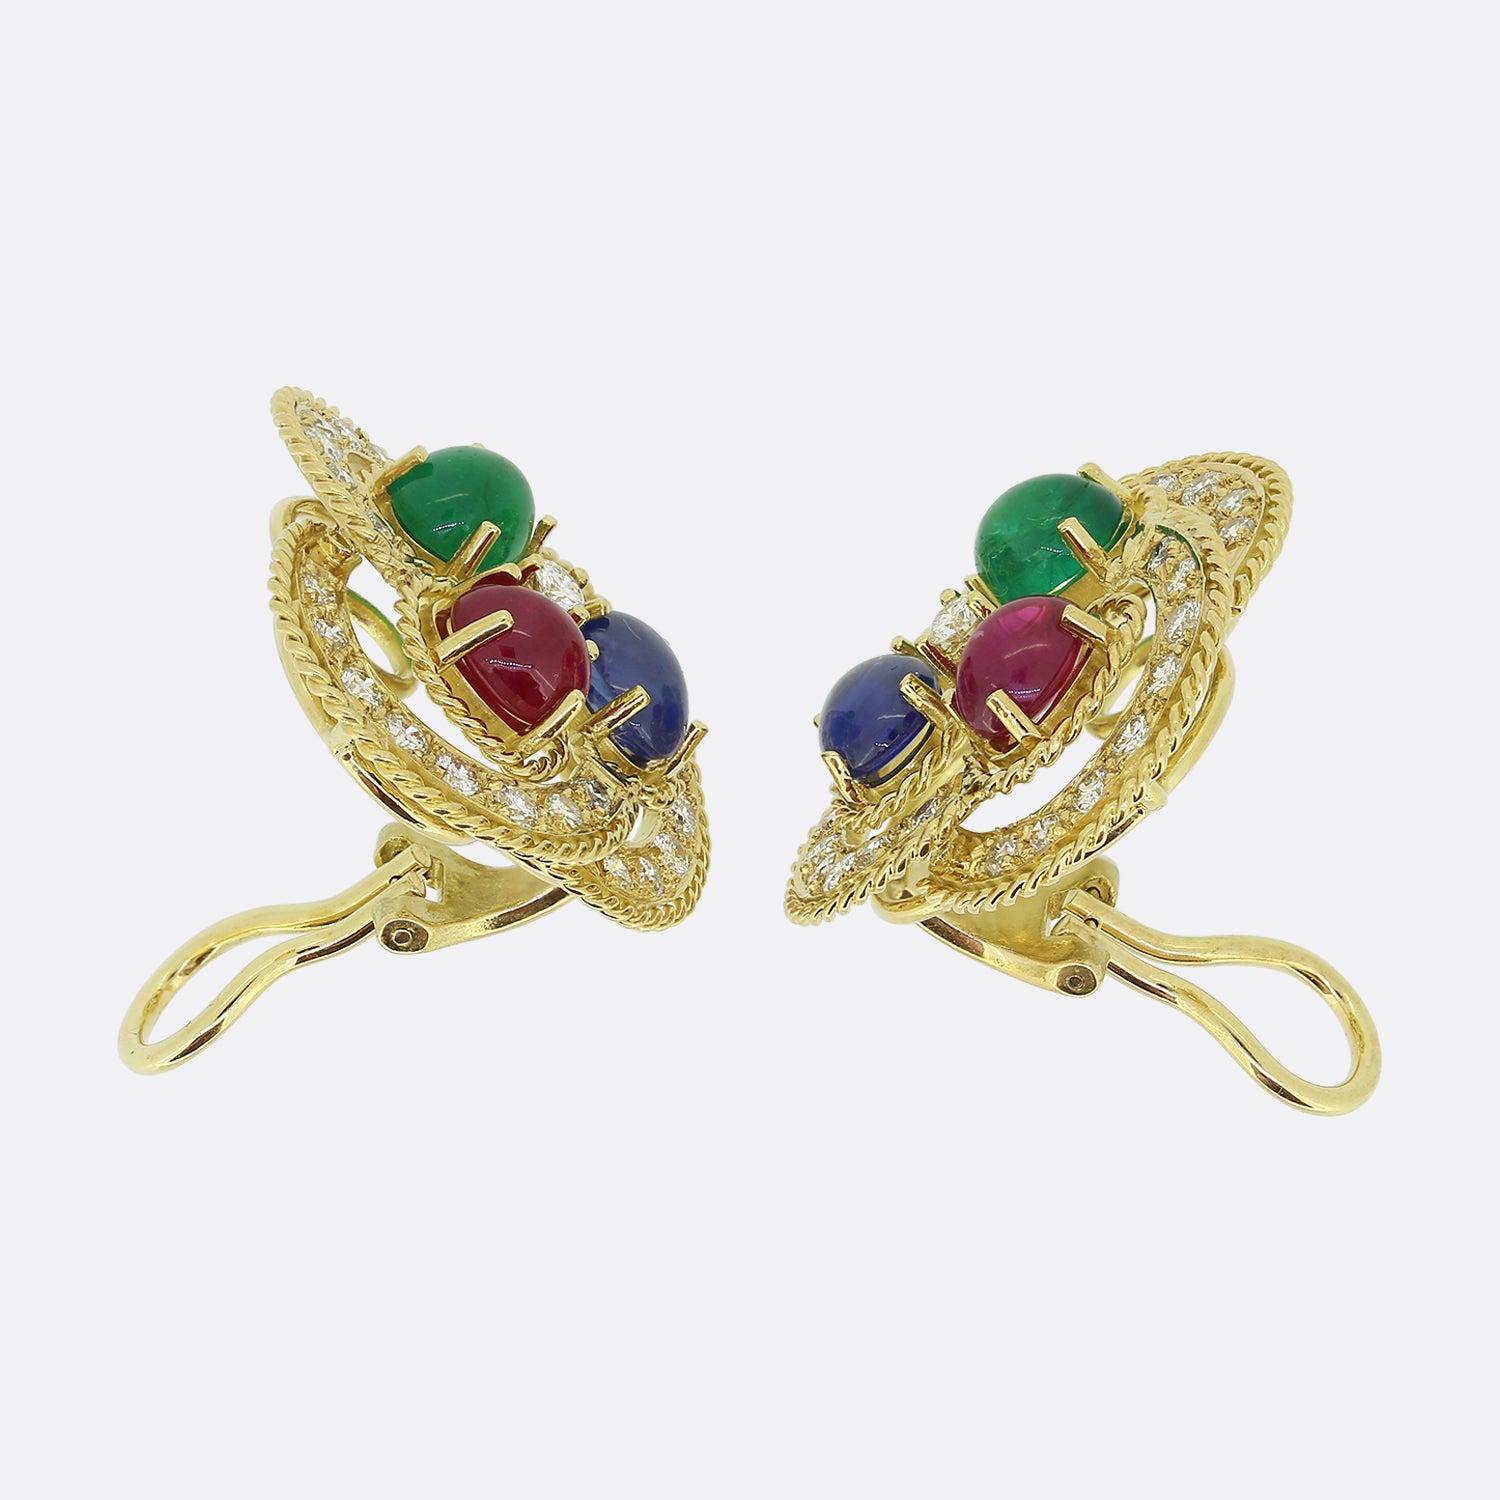 Here we have a delightful pair of vintage cluster earrings. Each piece showcases a trio of oval shaped cabochon gemstones at the centre including a rich red ruby, a bold blue sapphire and vivid green emerald. These focal gemstones are framed by a